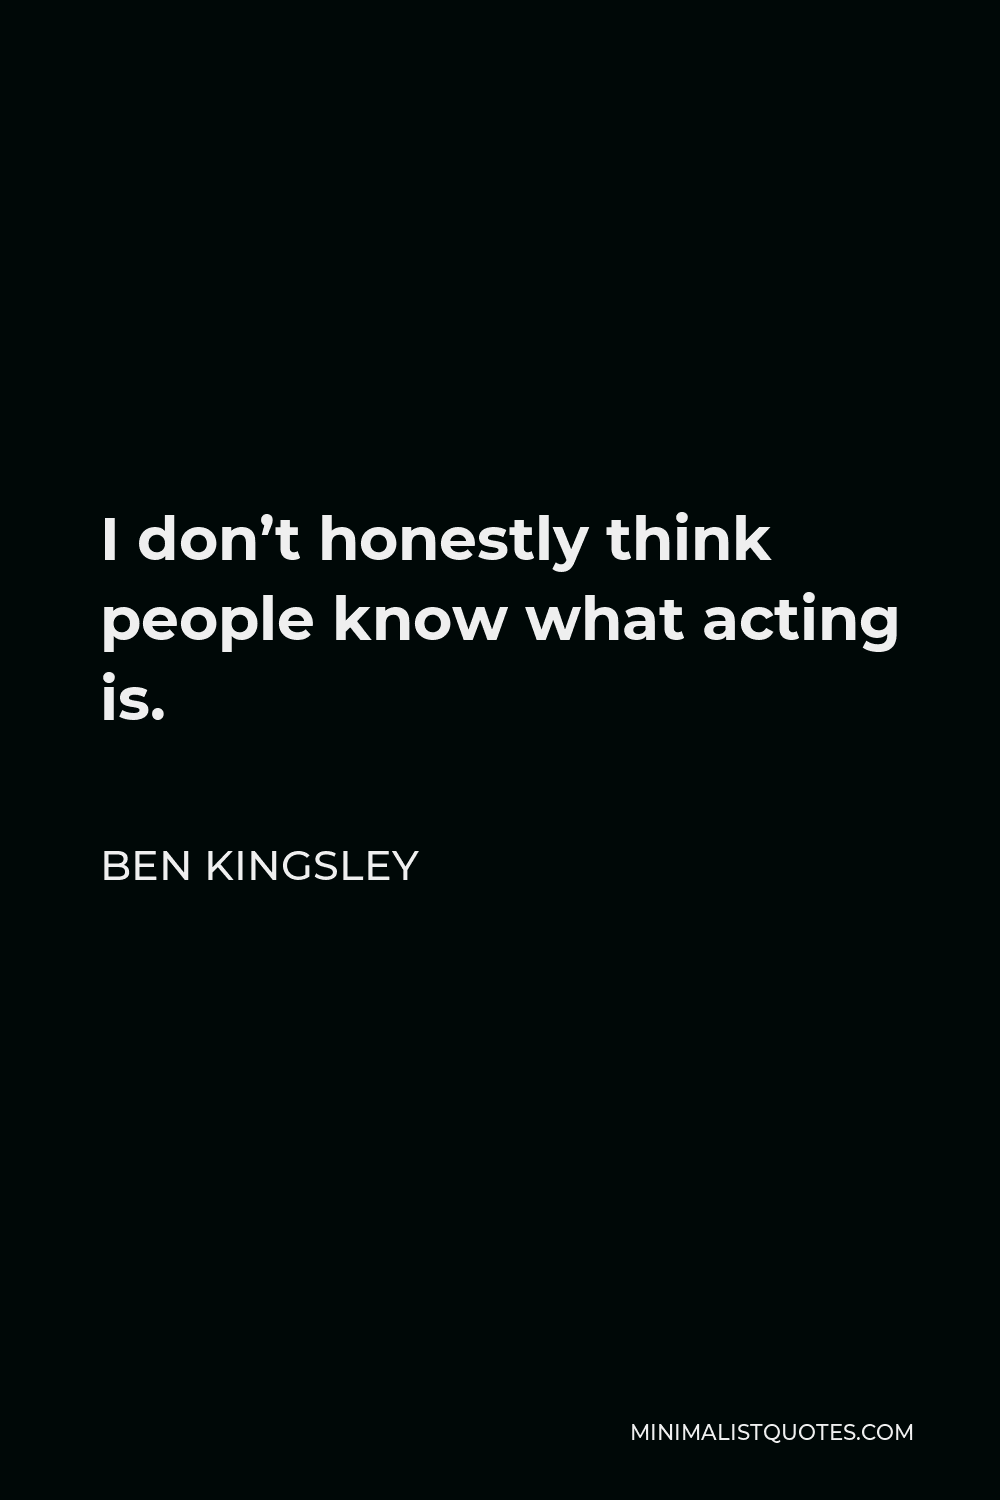 Ben Kingsley Quote - I don’t honestly think people know what acting is.